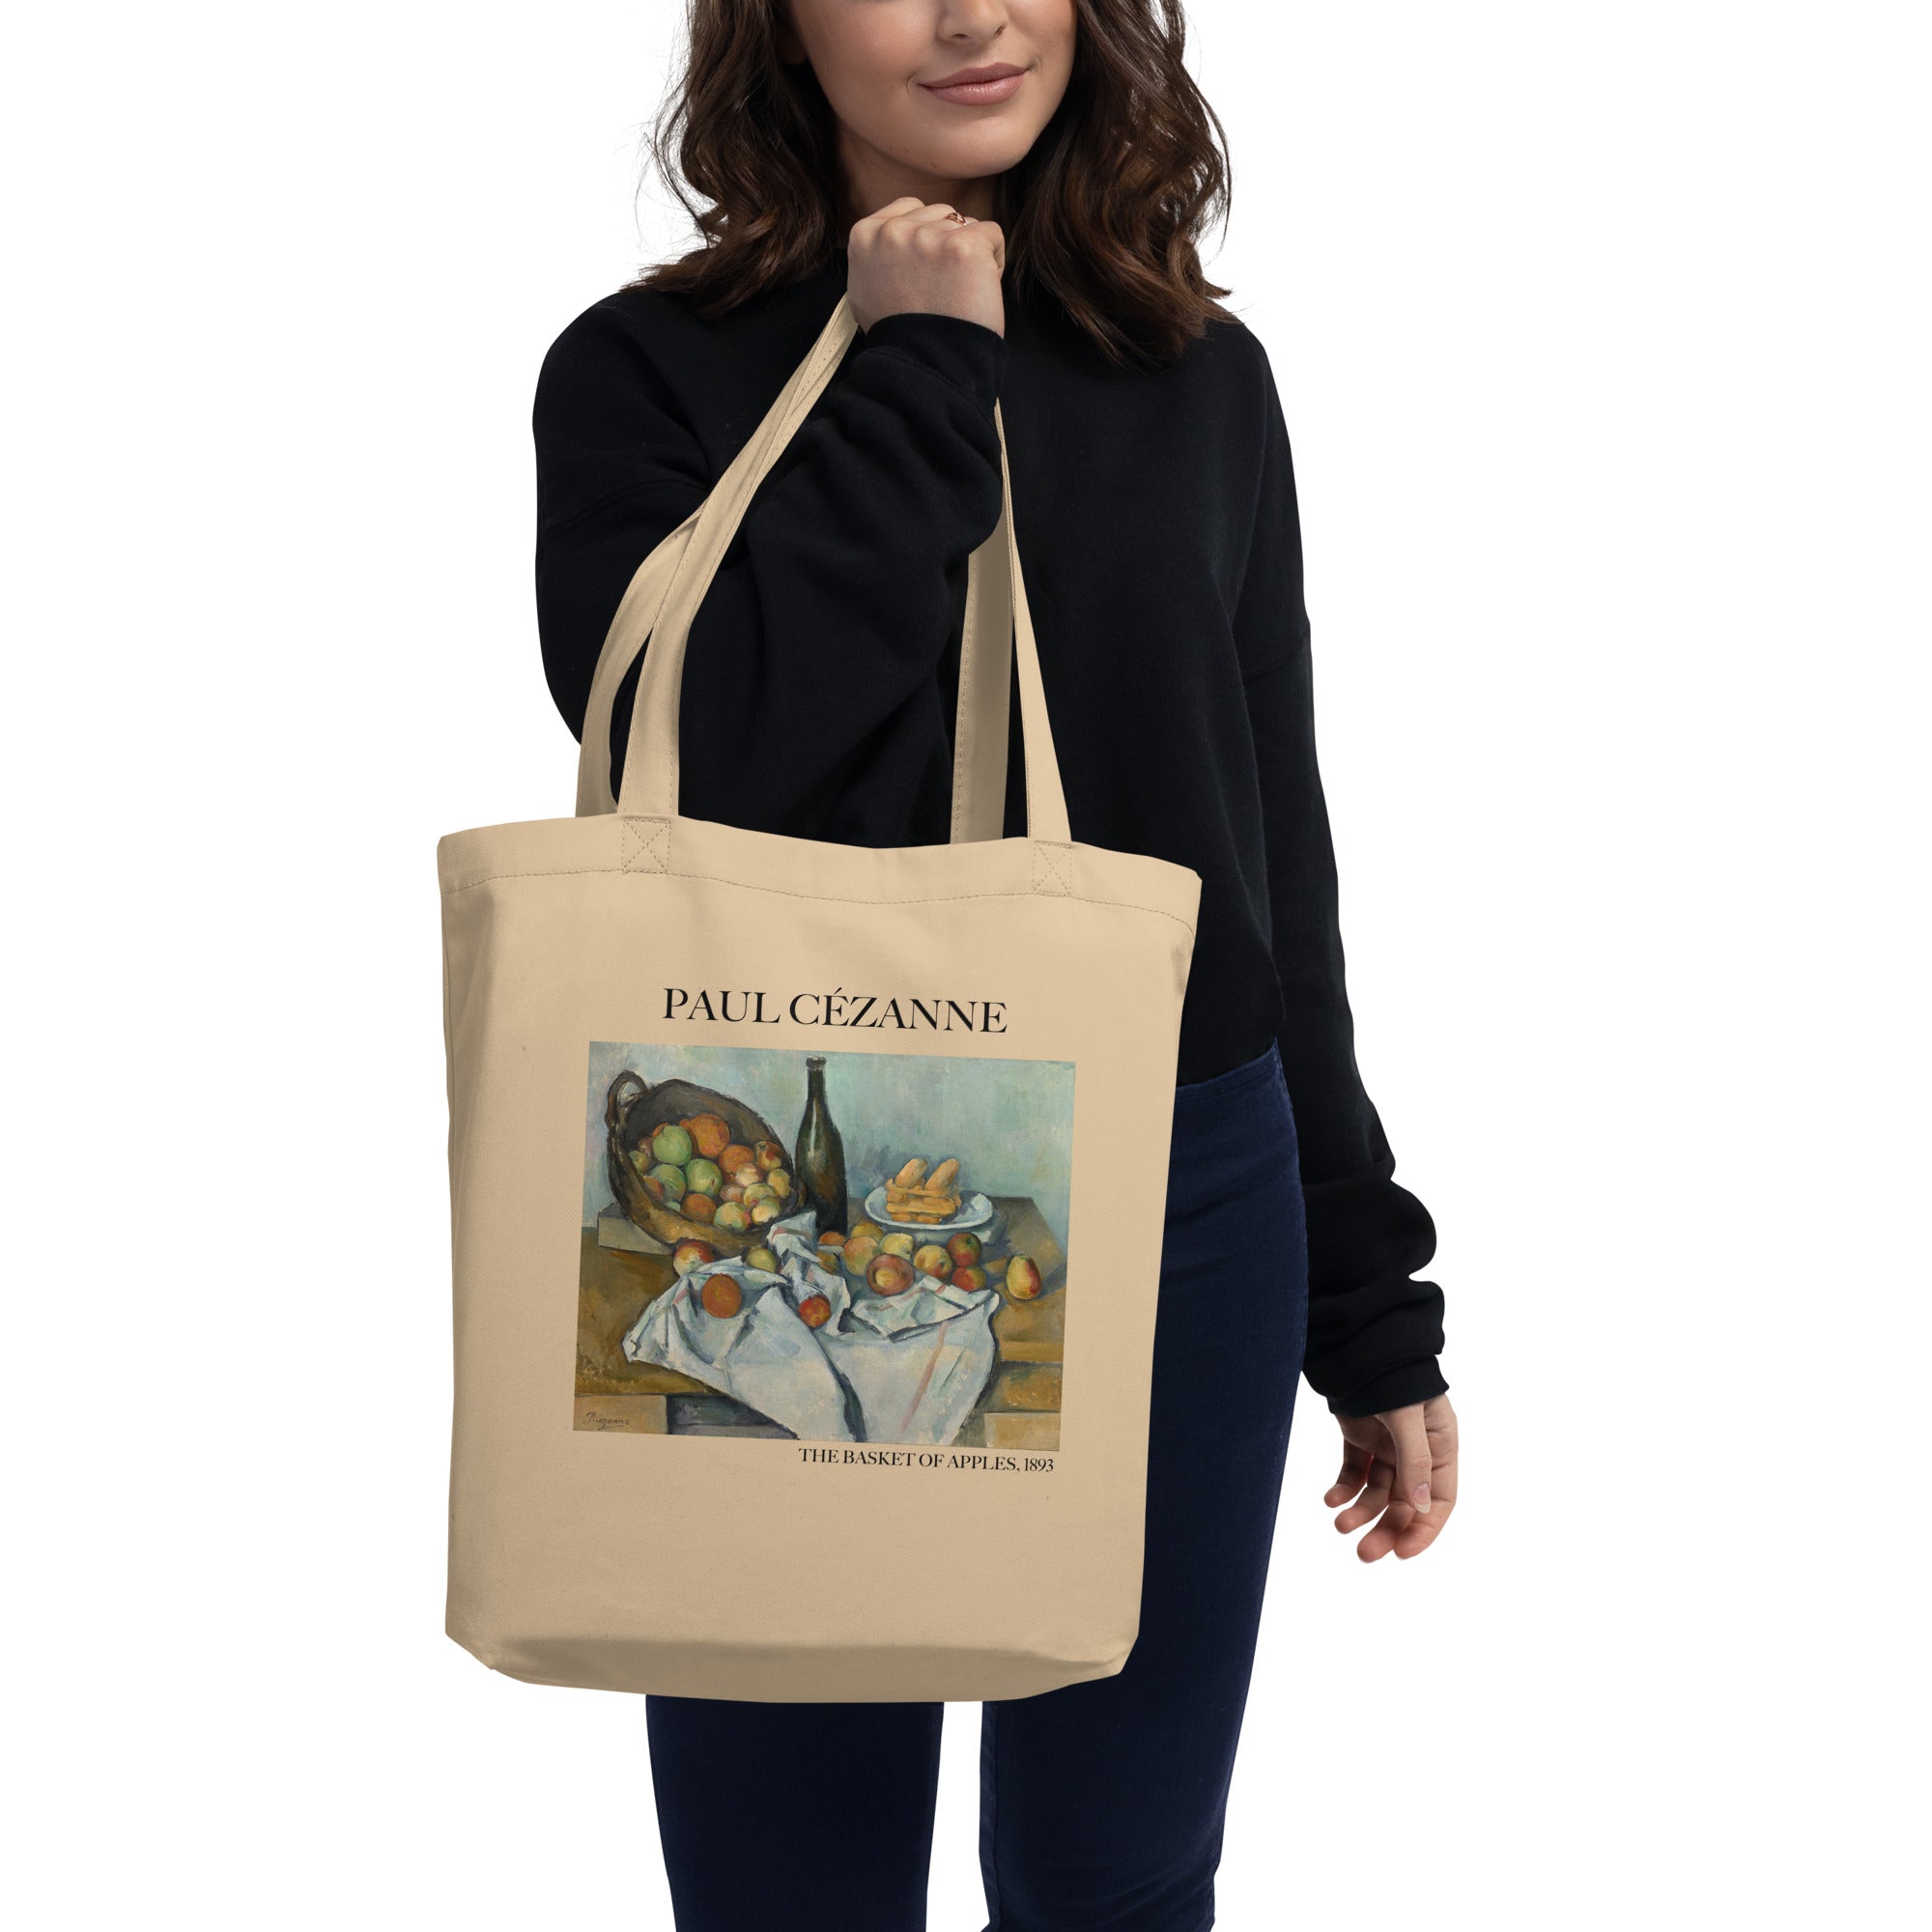 Paul Cézanne 'The Basket of Apples' Famous Painting Totebag | Eco Friendly Art Tote Bag